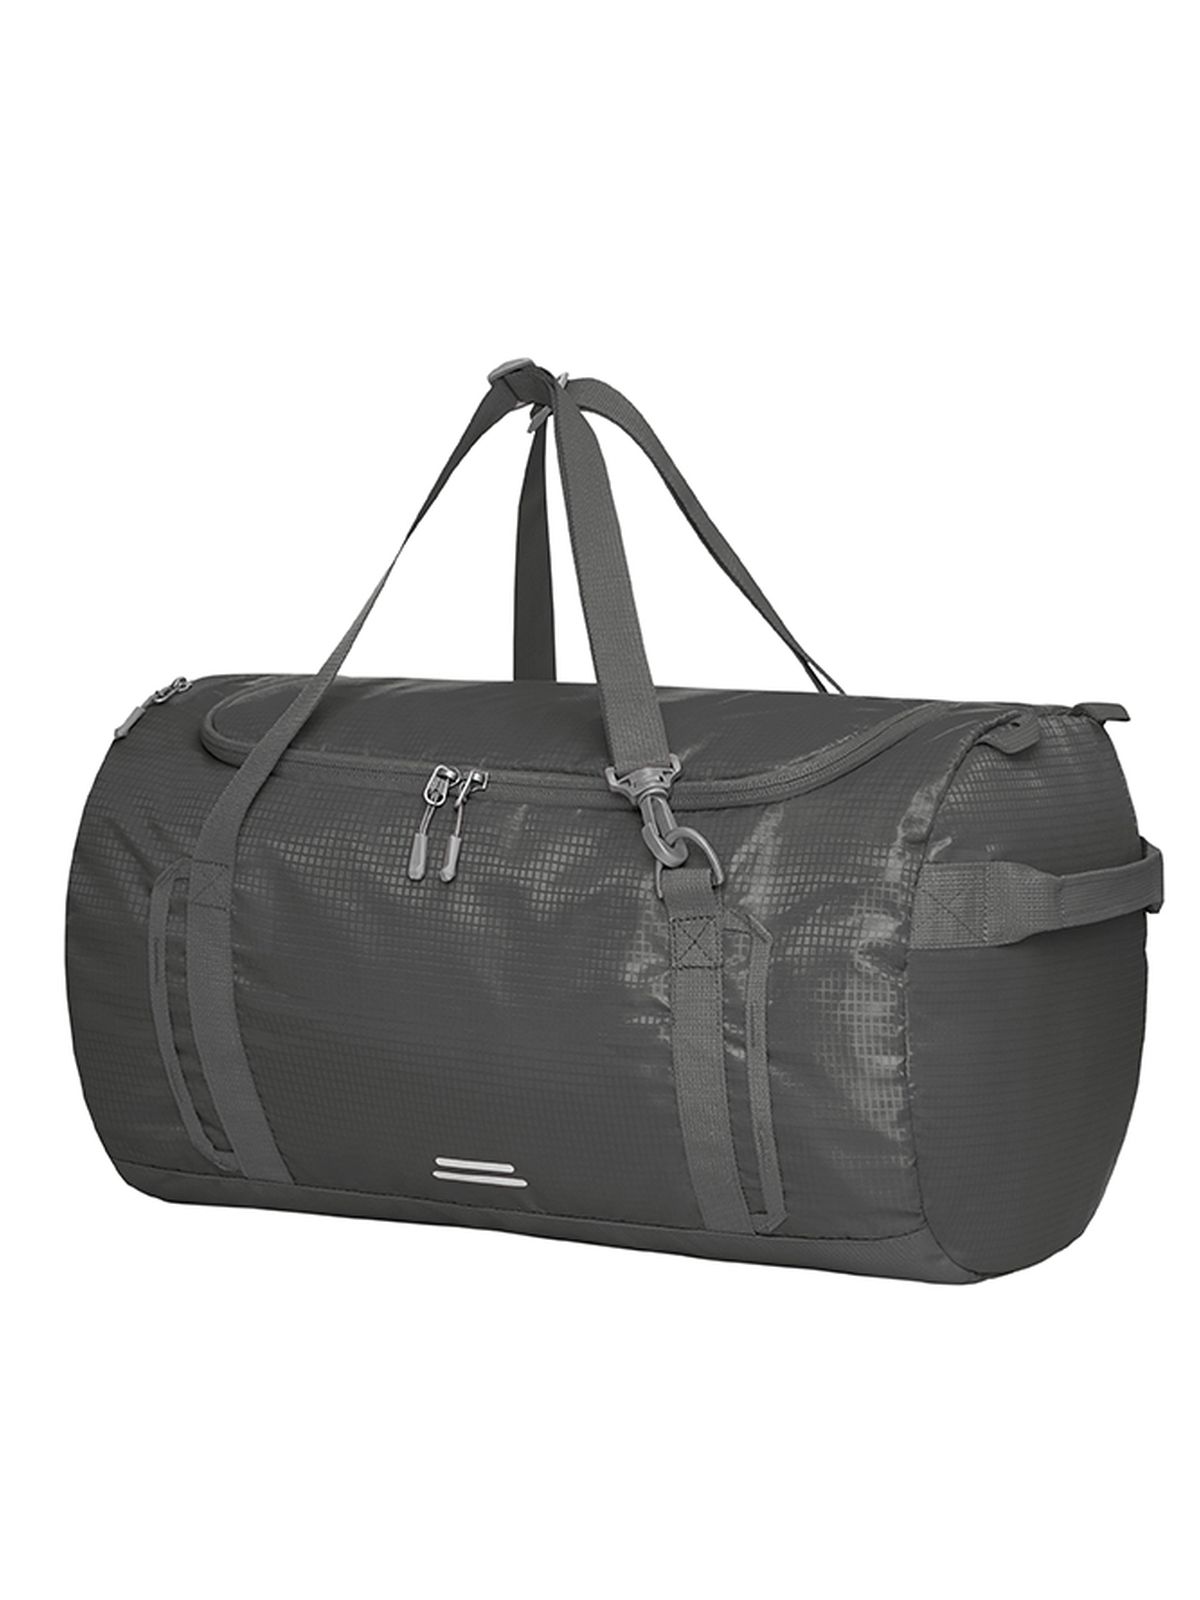 sports-bag-outdoor-anthracite.webp